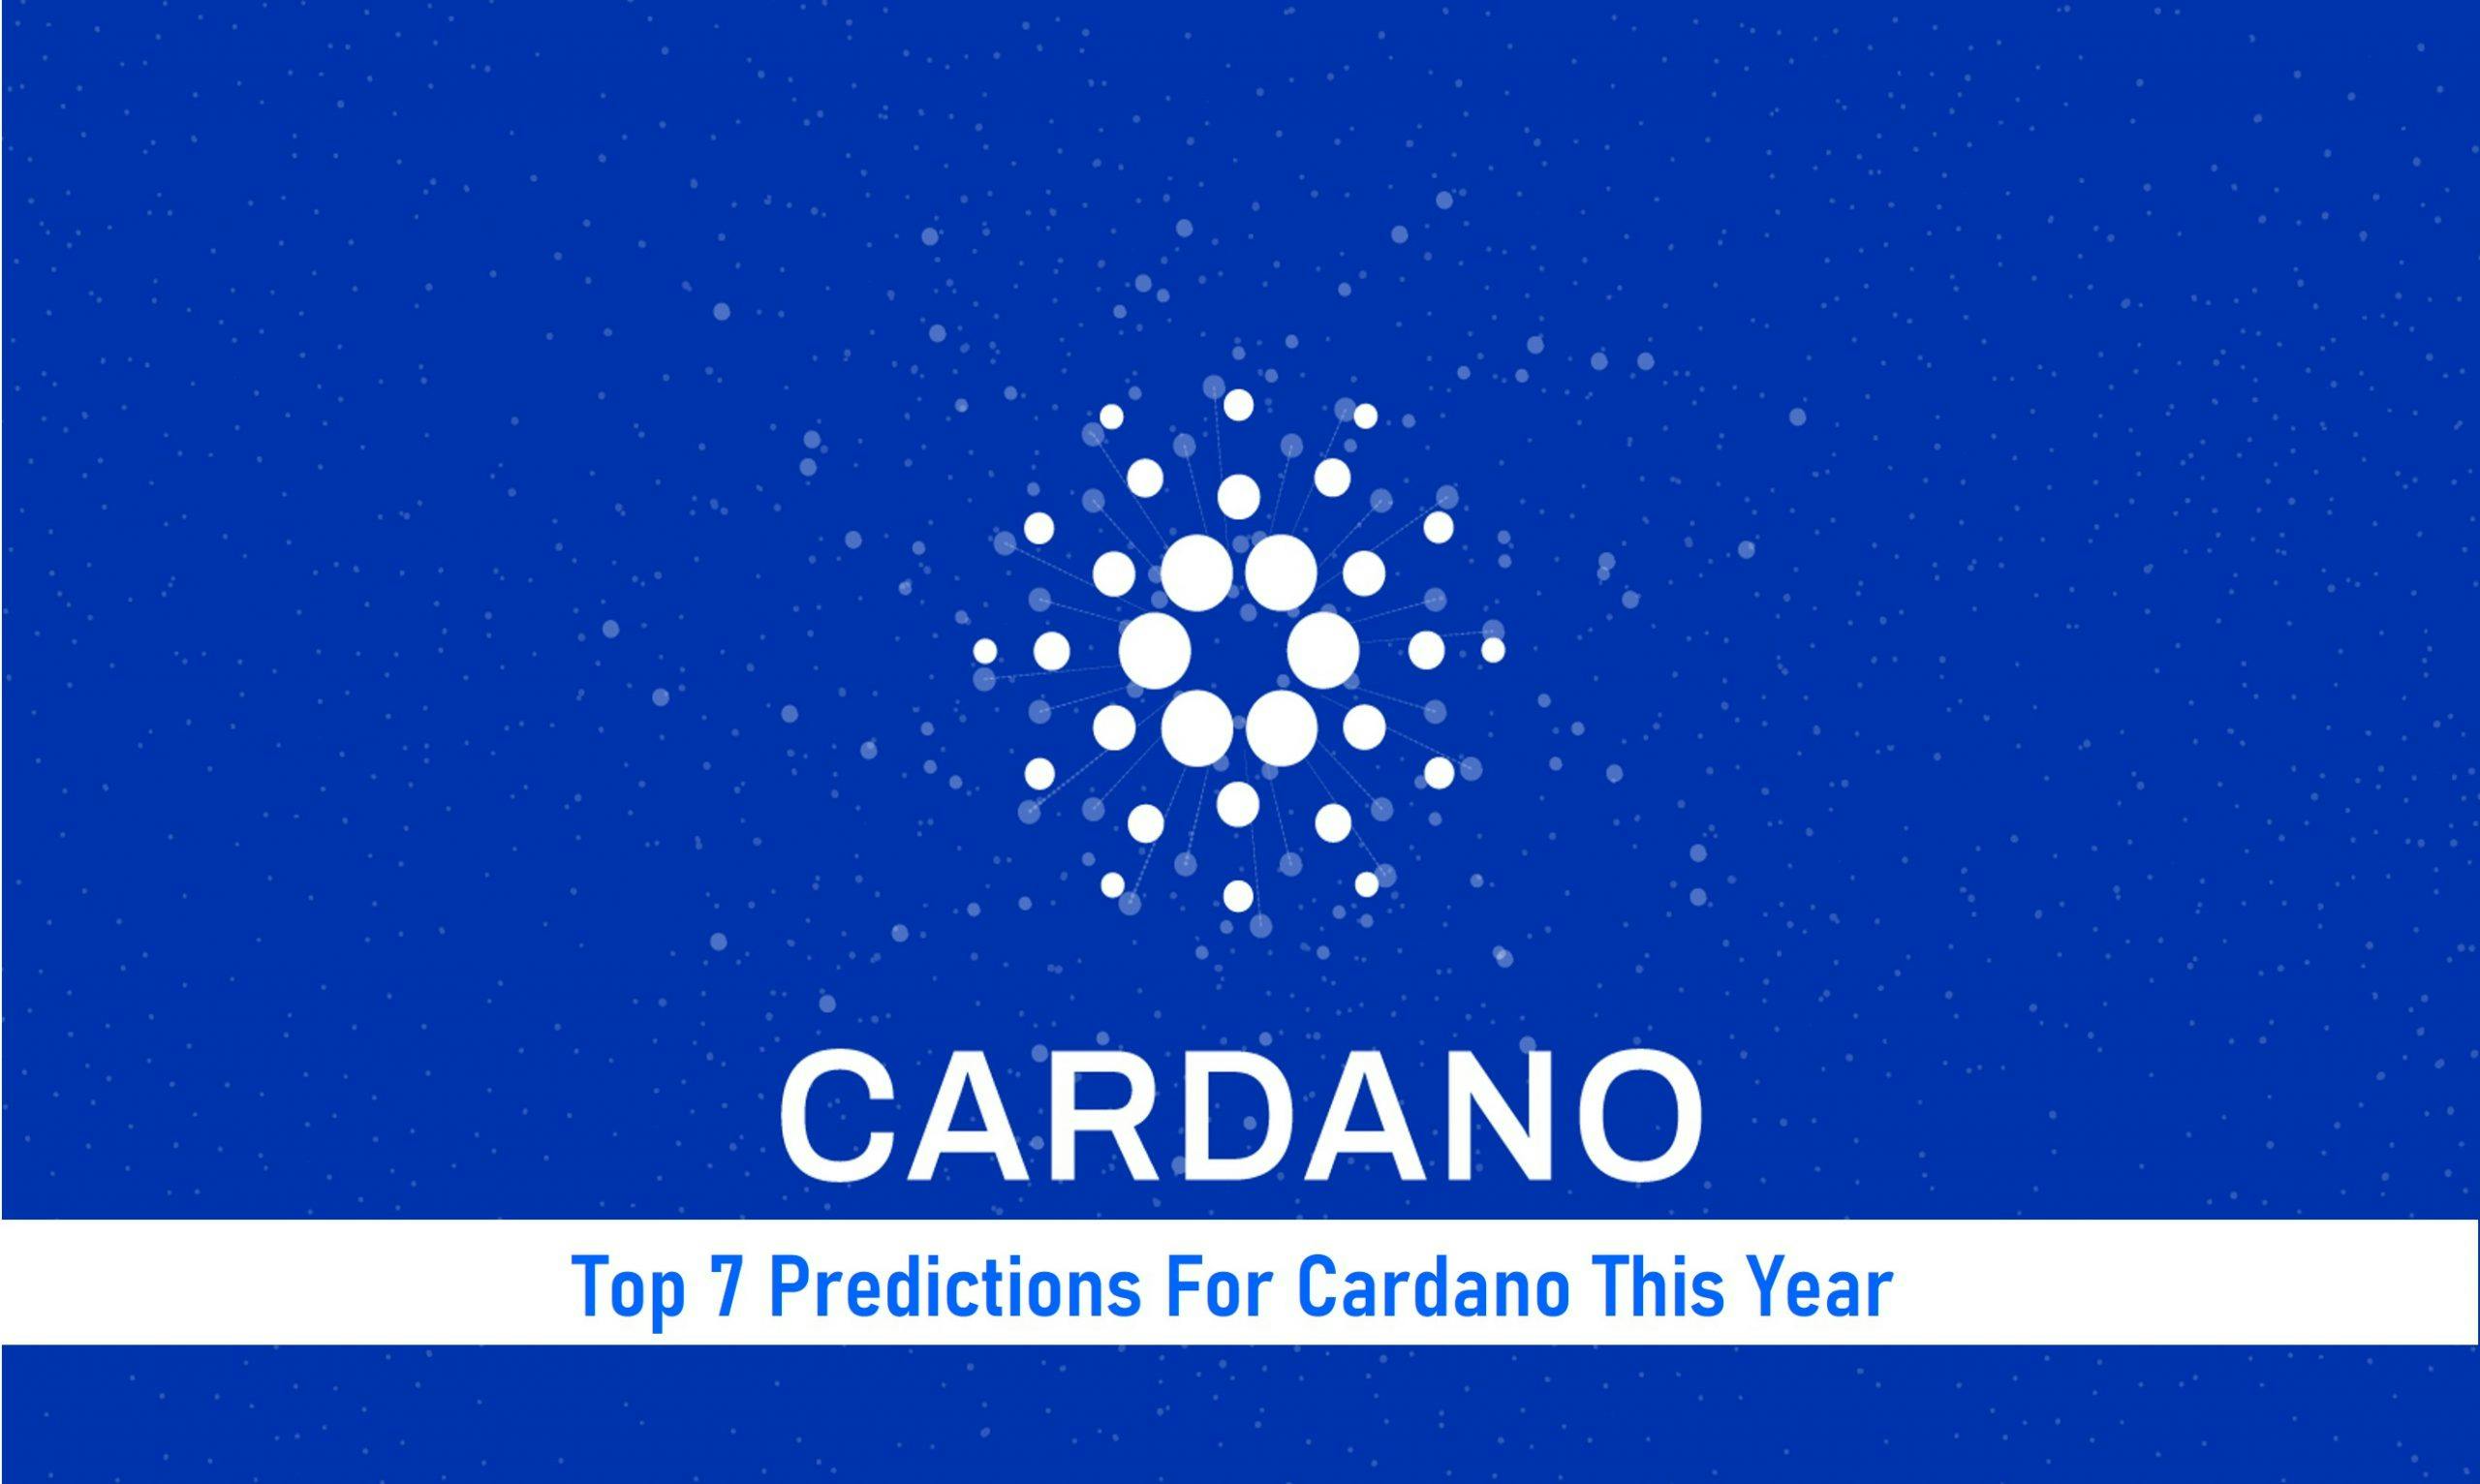 Top 7 Predictions For Cardano This Year 2022